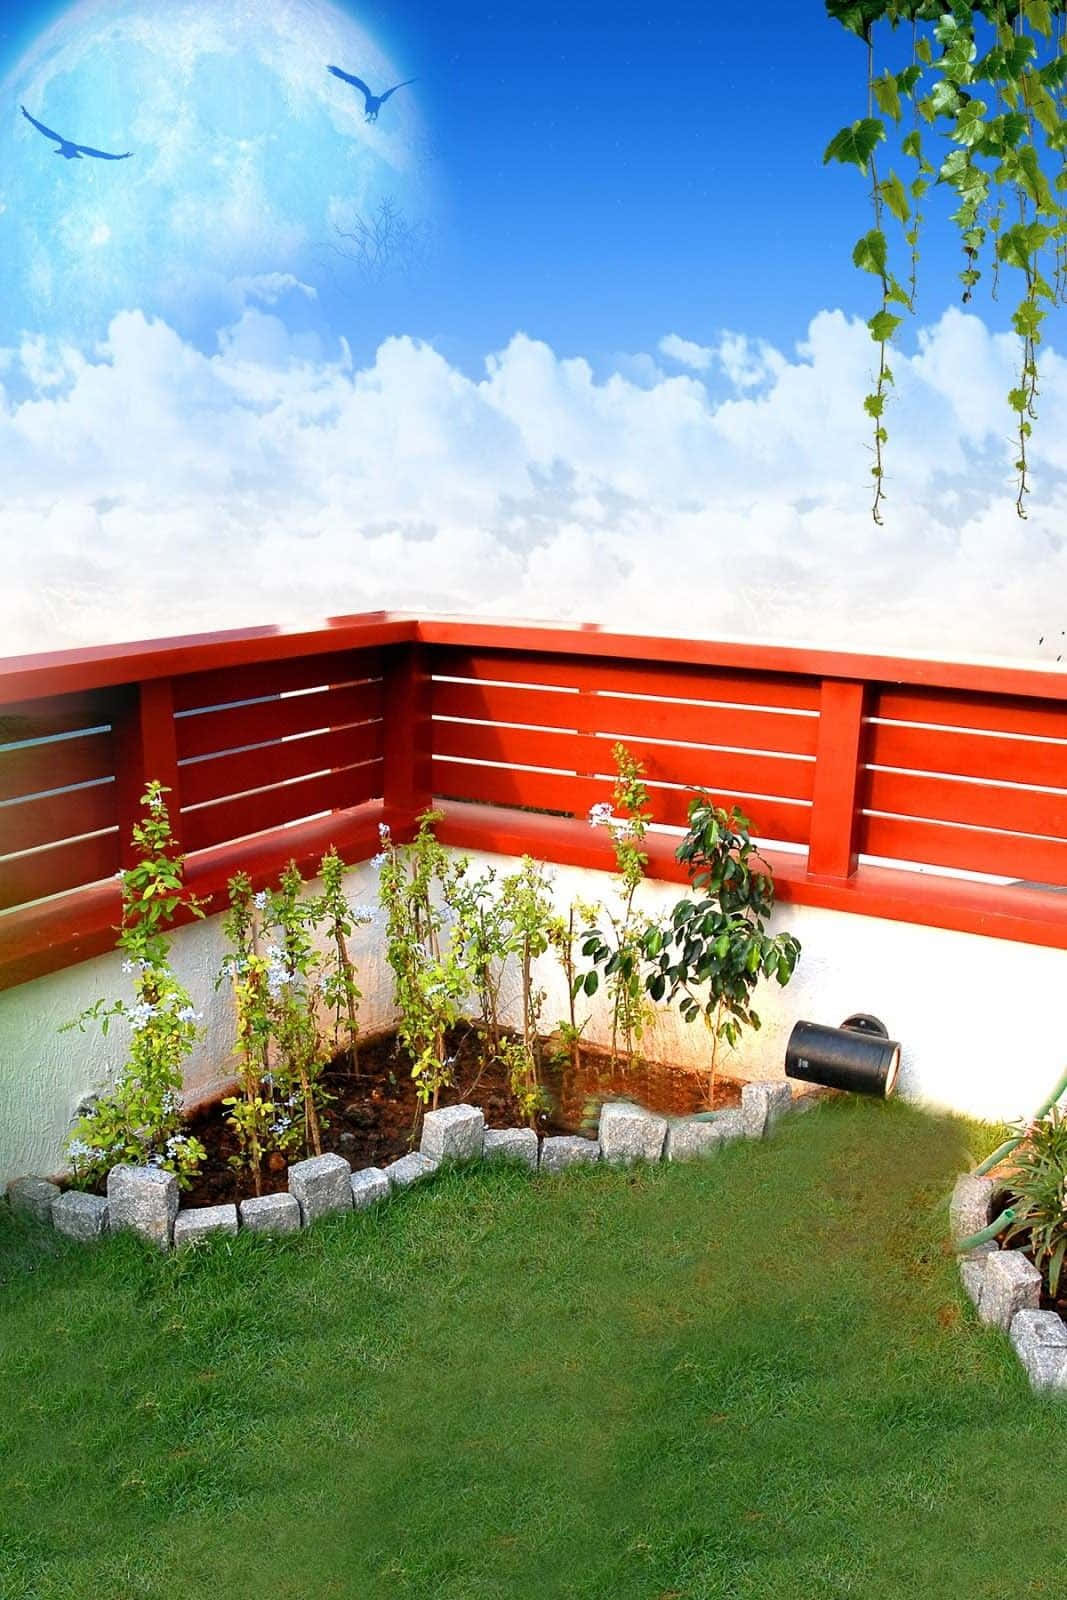 A Small Garden With A Red Fence